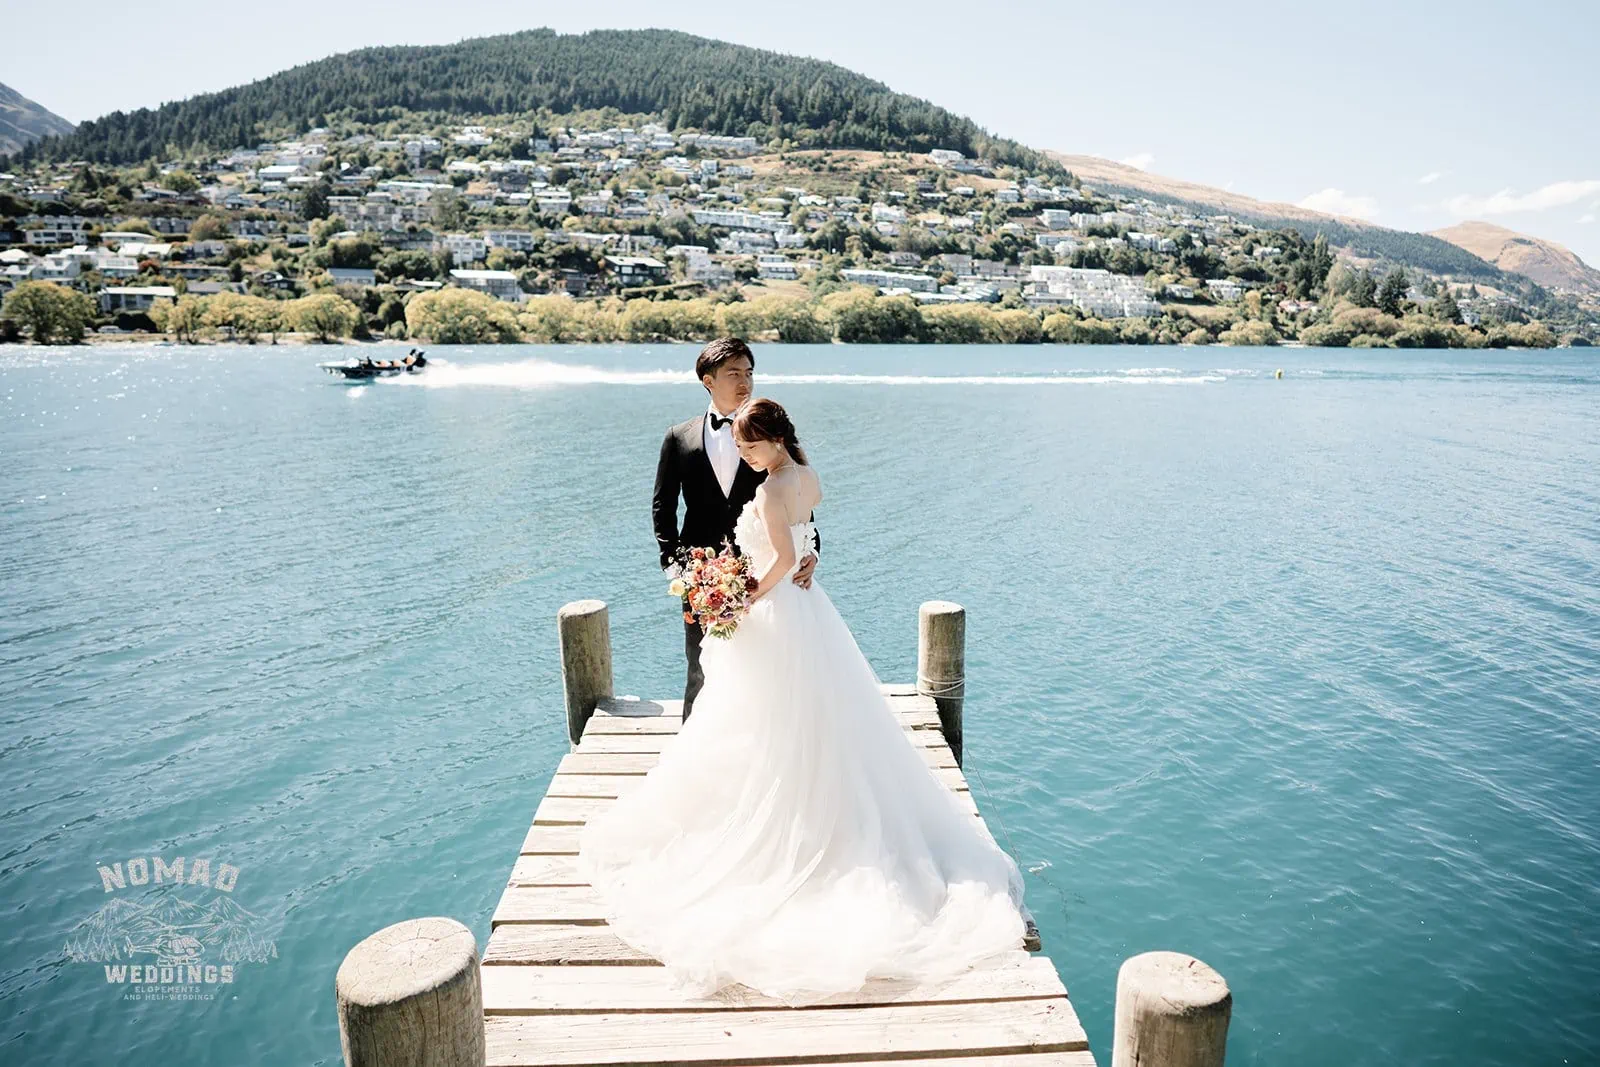 Queenstown New Zealand Elopement Wedding Photographer - A bride and groom standing on a dock in front of a lake during summer.